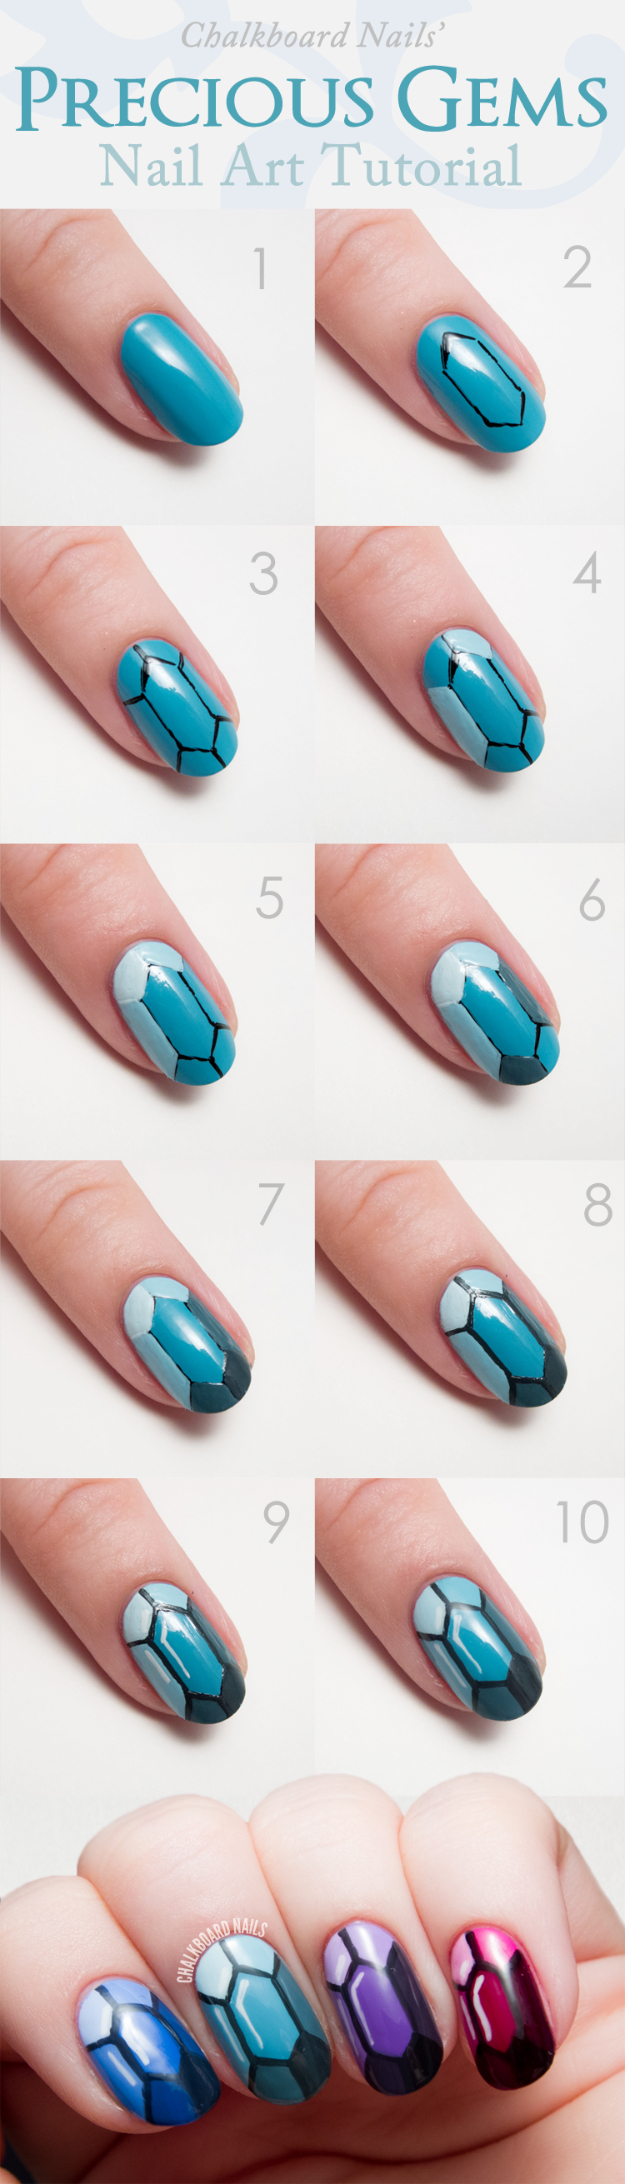 28 Brilliantly Creative Nail Art Patterns - DIY Projects for Teens